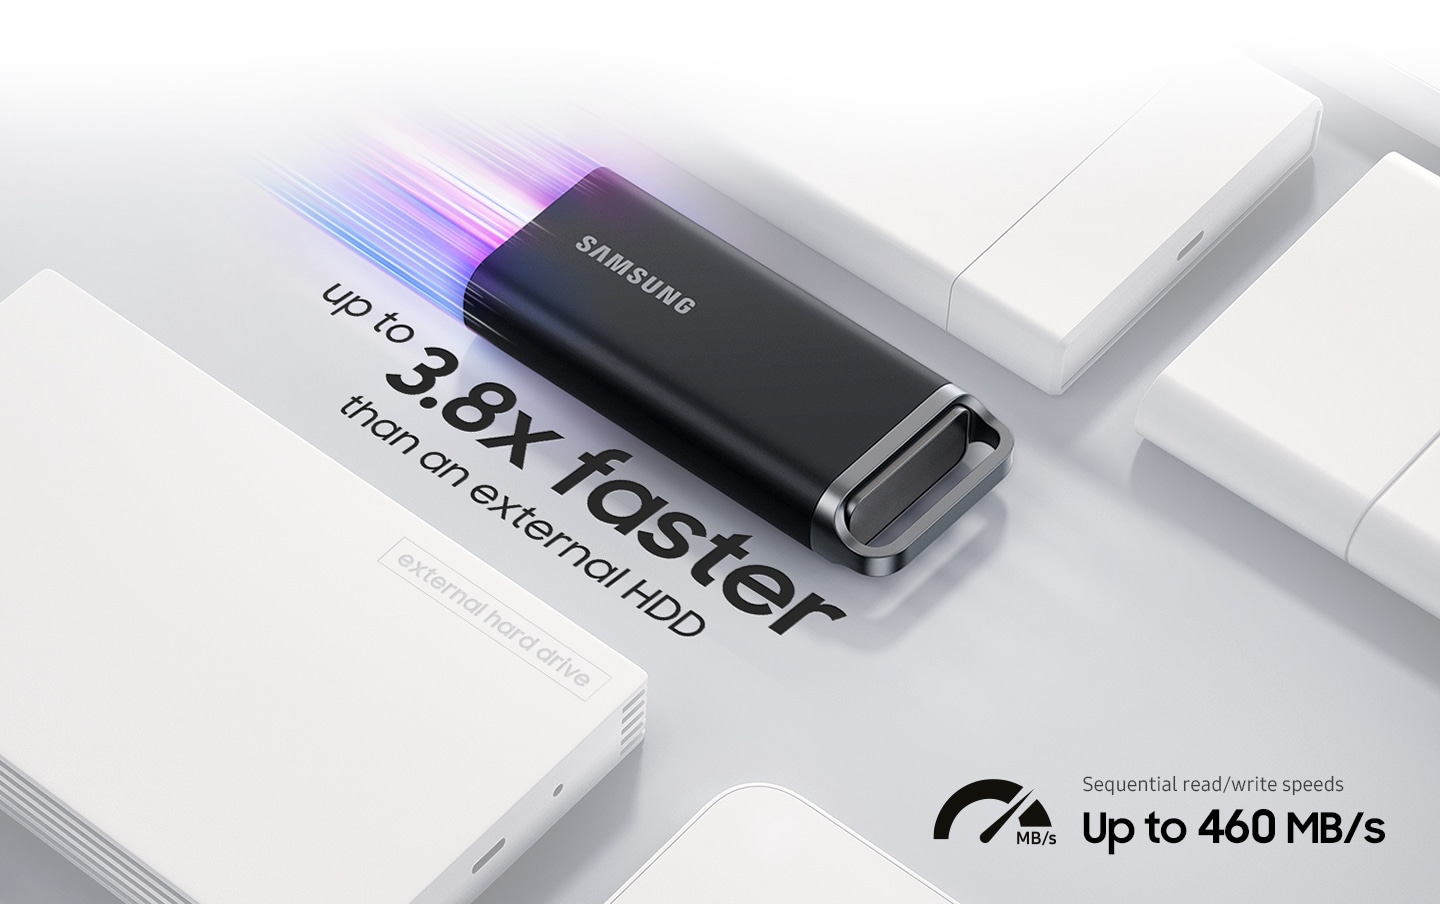 The T5 EVO showcases sequential read and write speeds of up to 460MB/s. It's engineered for productivity, delivering performance 3.8 times faster than standard external ssd.